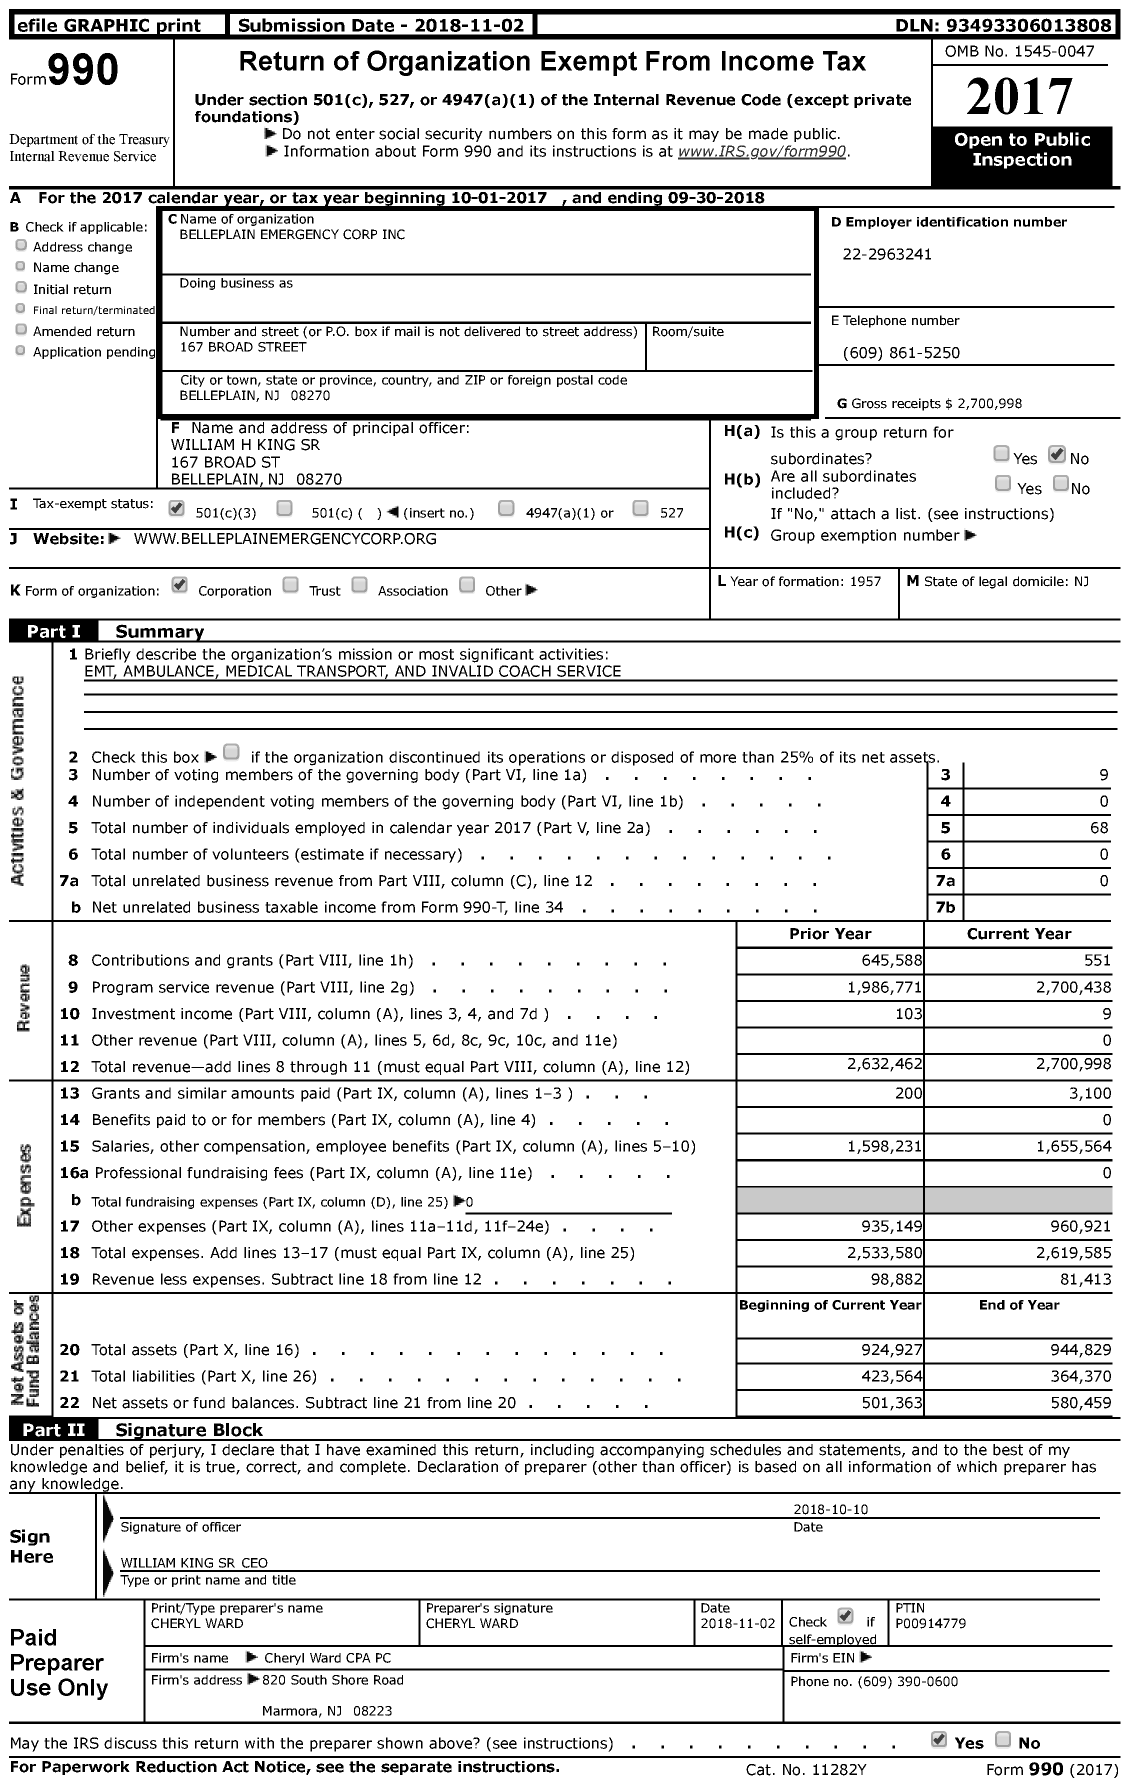 Image of first page of 2017 Form 990 for Belleplain Emergency Corps (BEC)